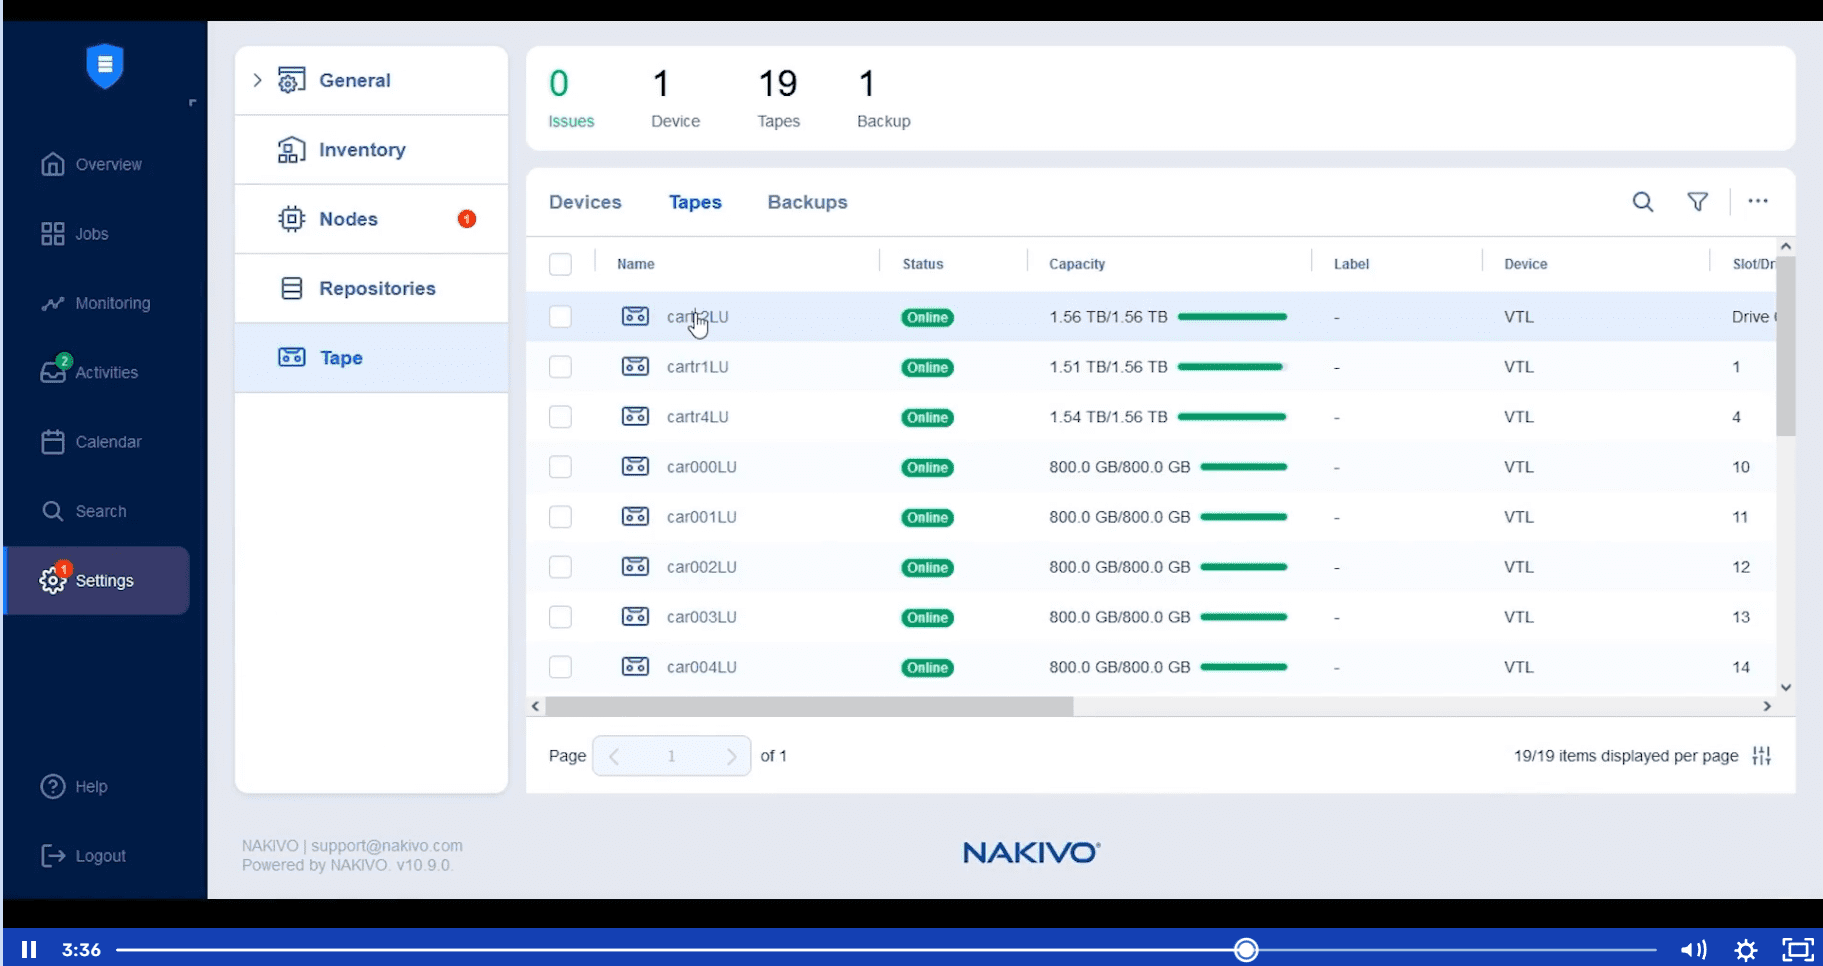 NAKIVO Backup and Replication v10.9 supports direct recovery from tape